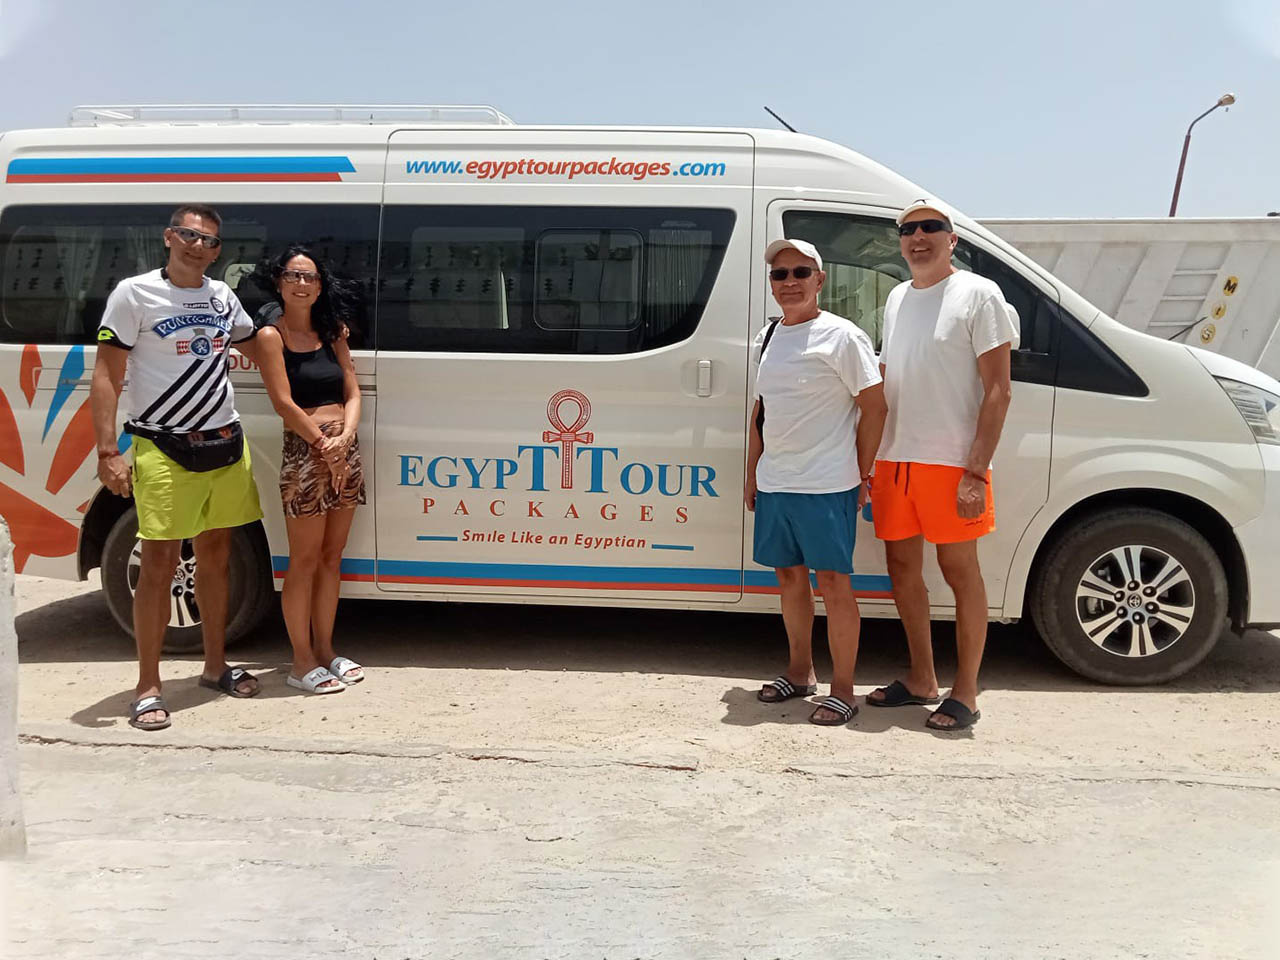 Transfer from Hotel in Luxor to Hurghada Airport